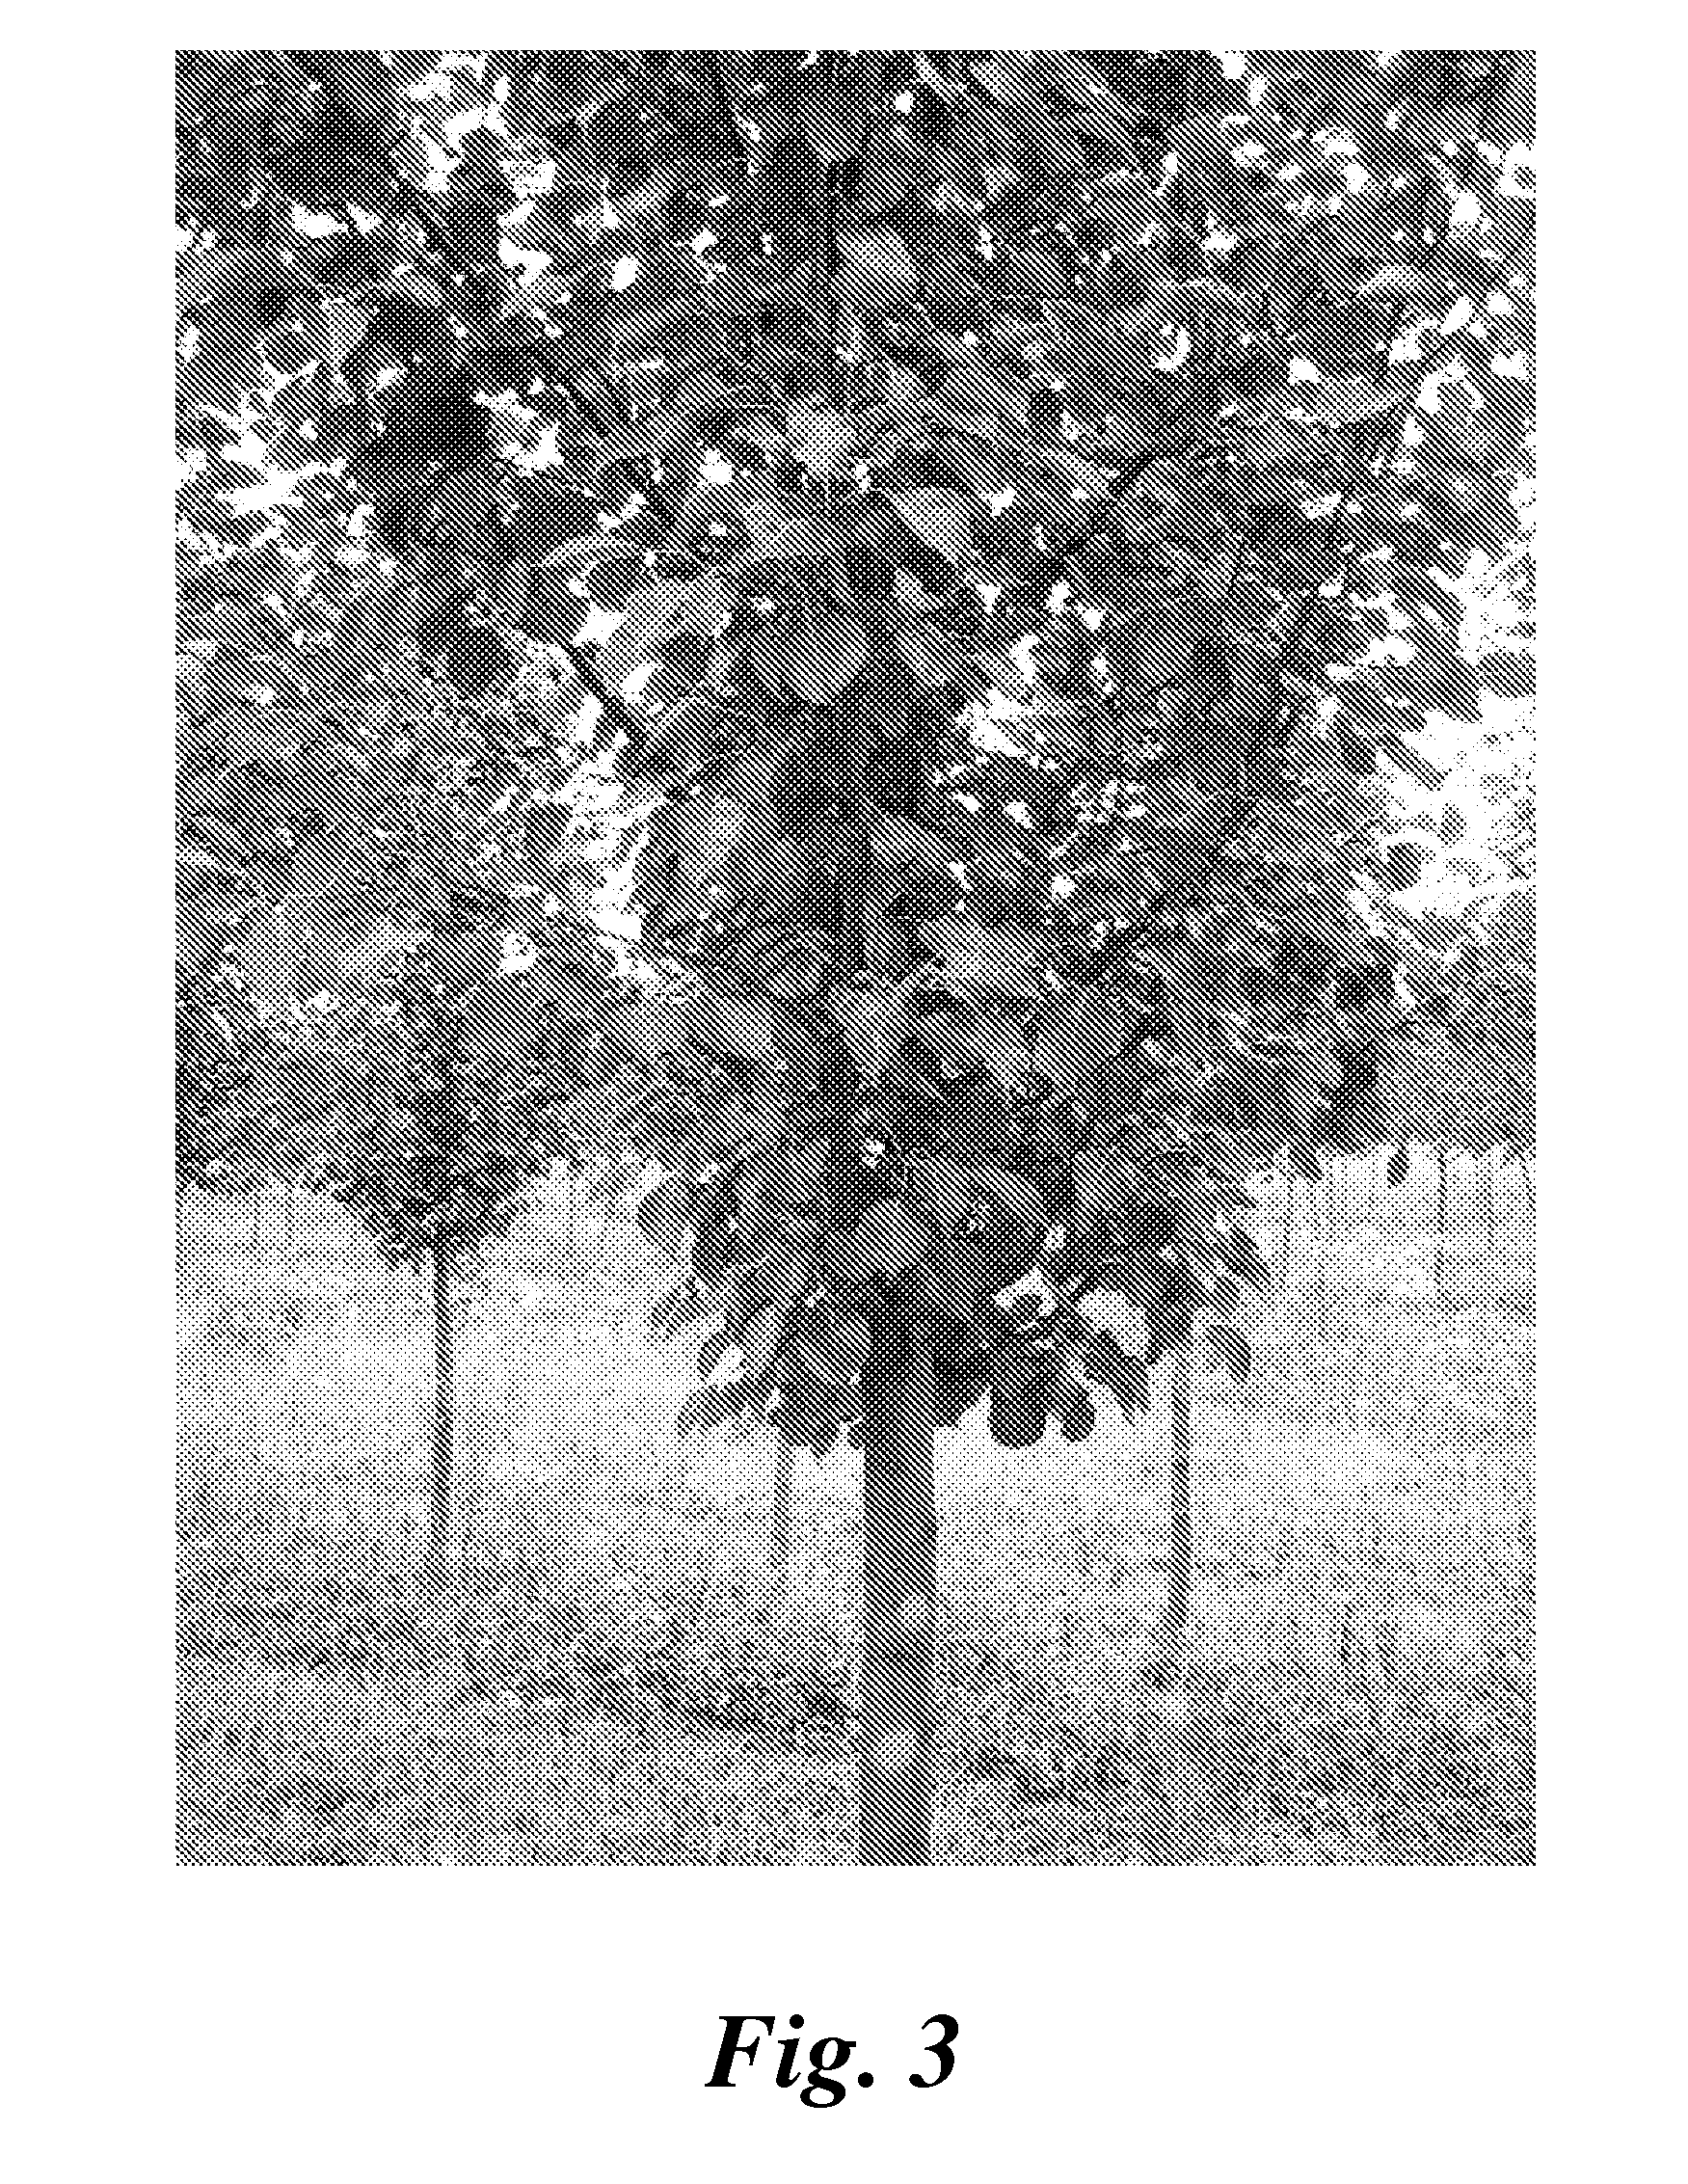 Formulation and method for treating plants to control or suppress a plant pathogen